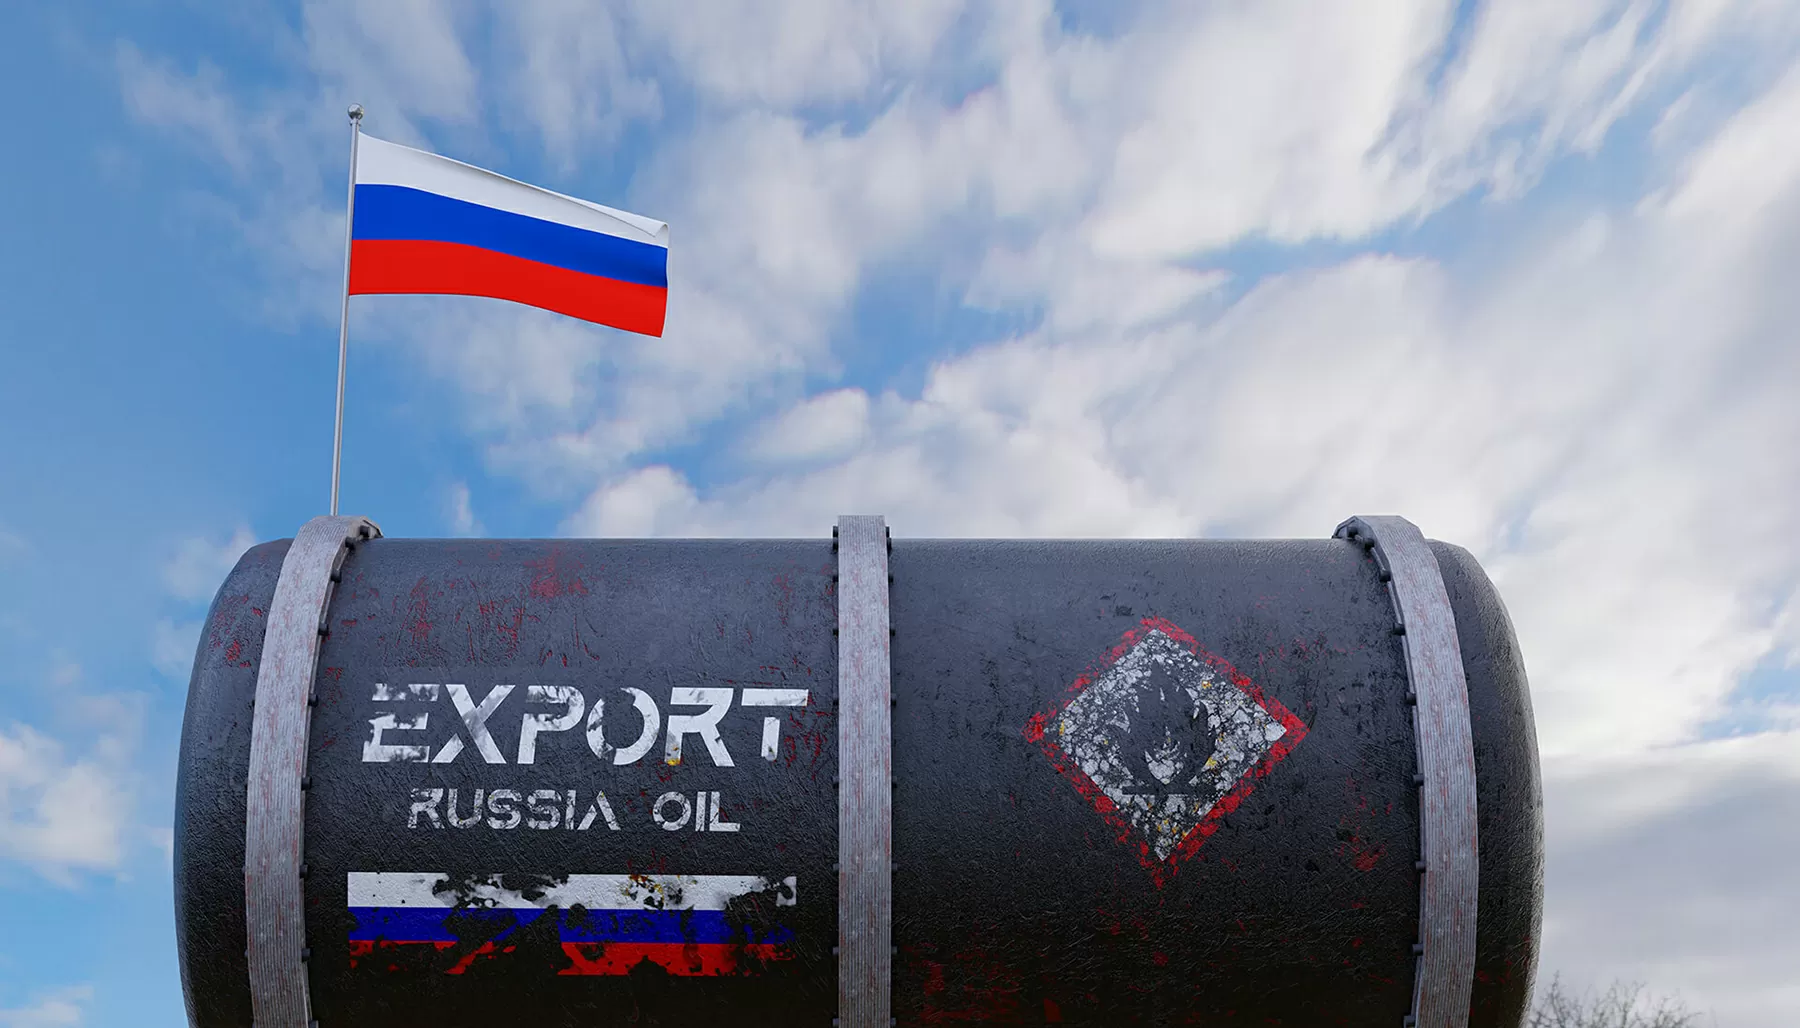 the refining process of Russian oil has generated higher quantities of furnace oil and fewer desirable produc